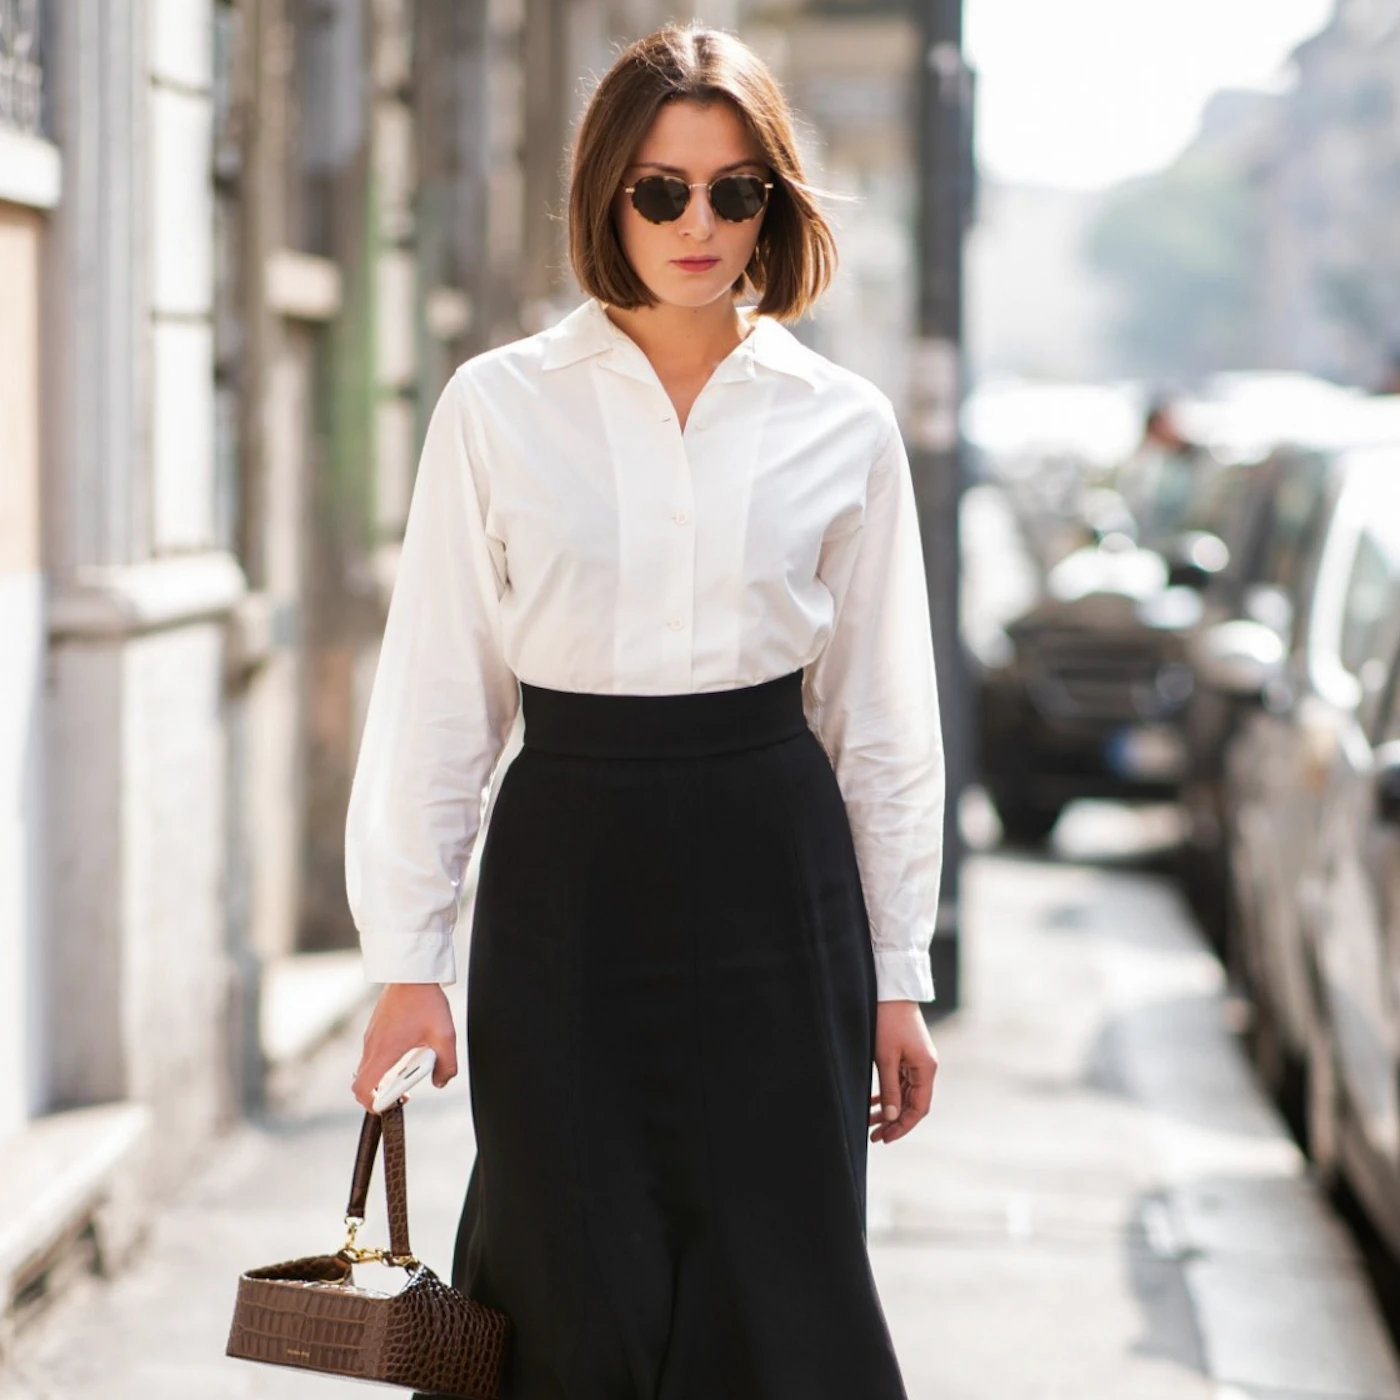 10 reasons the white shirt could be your best fashion buy of 2019